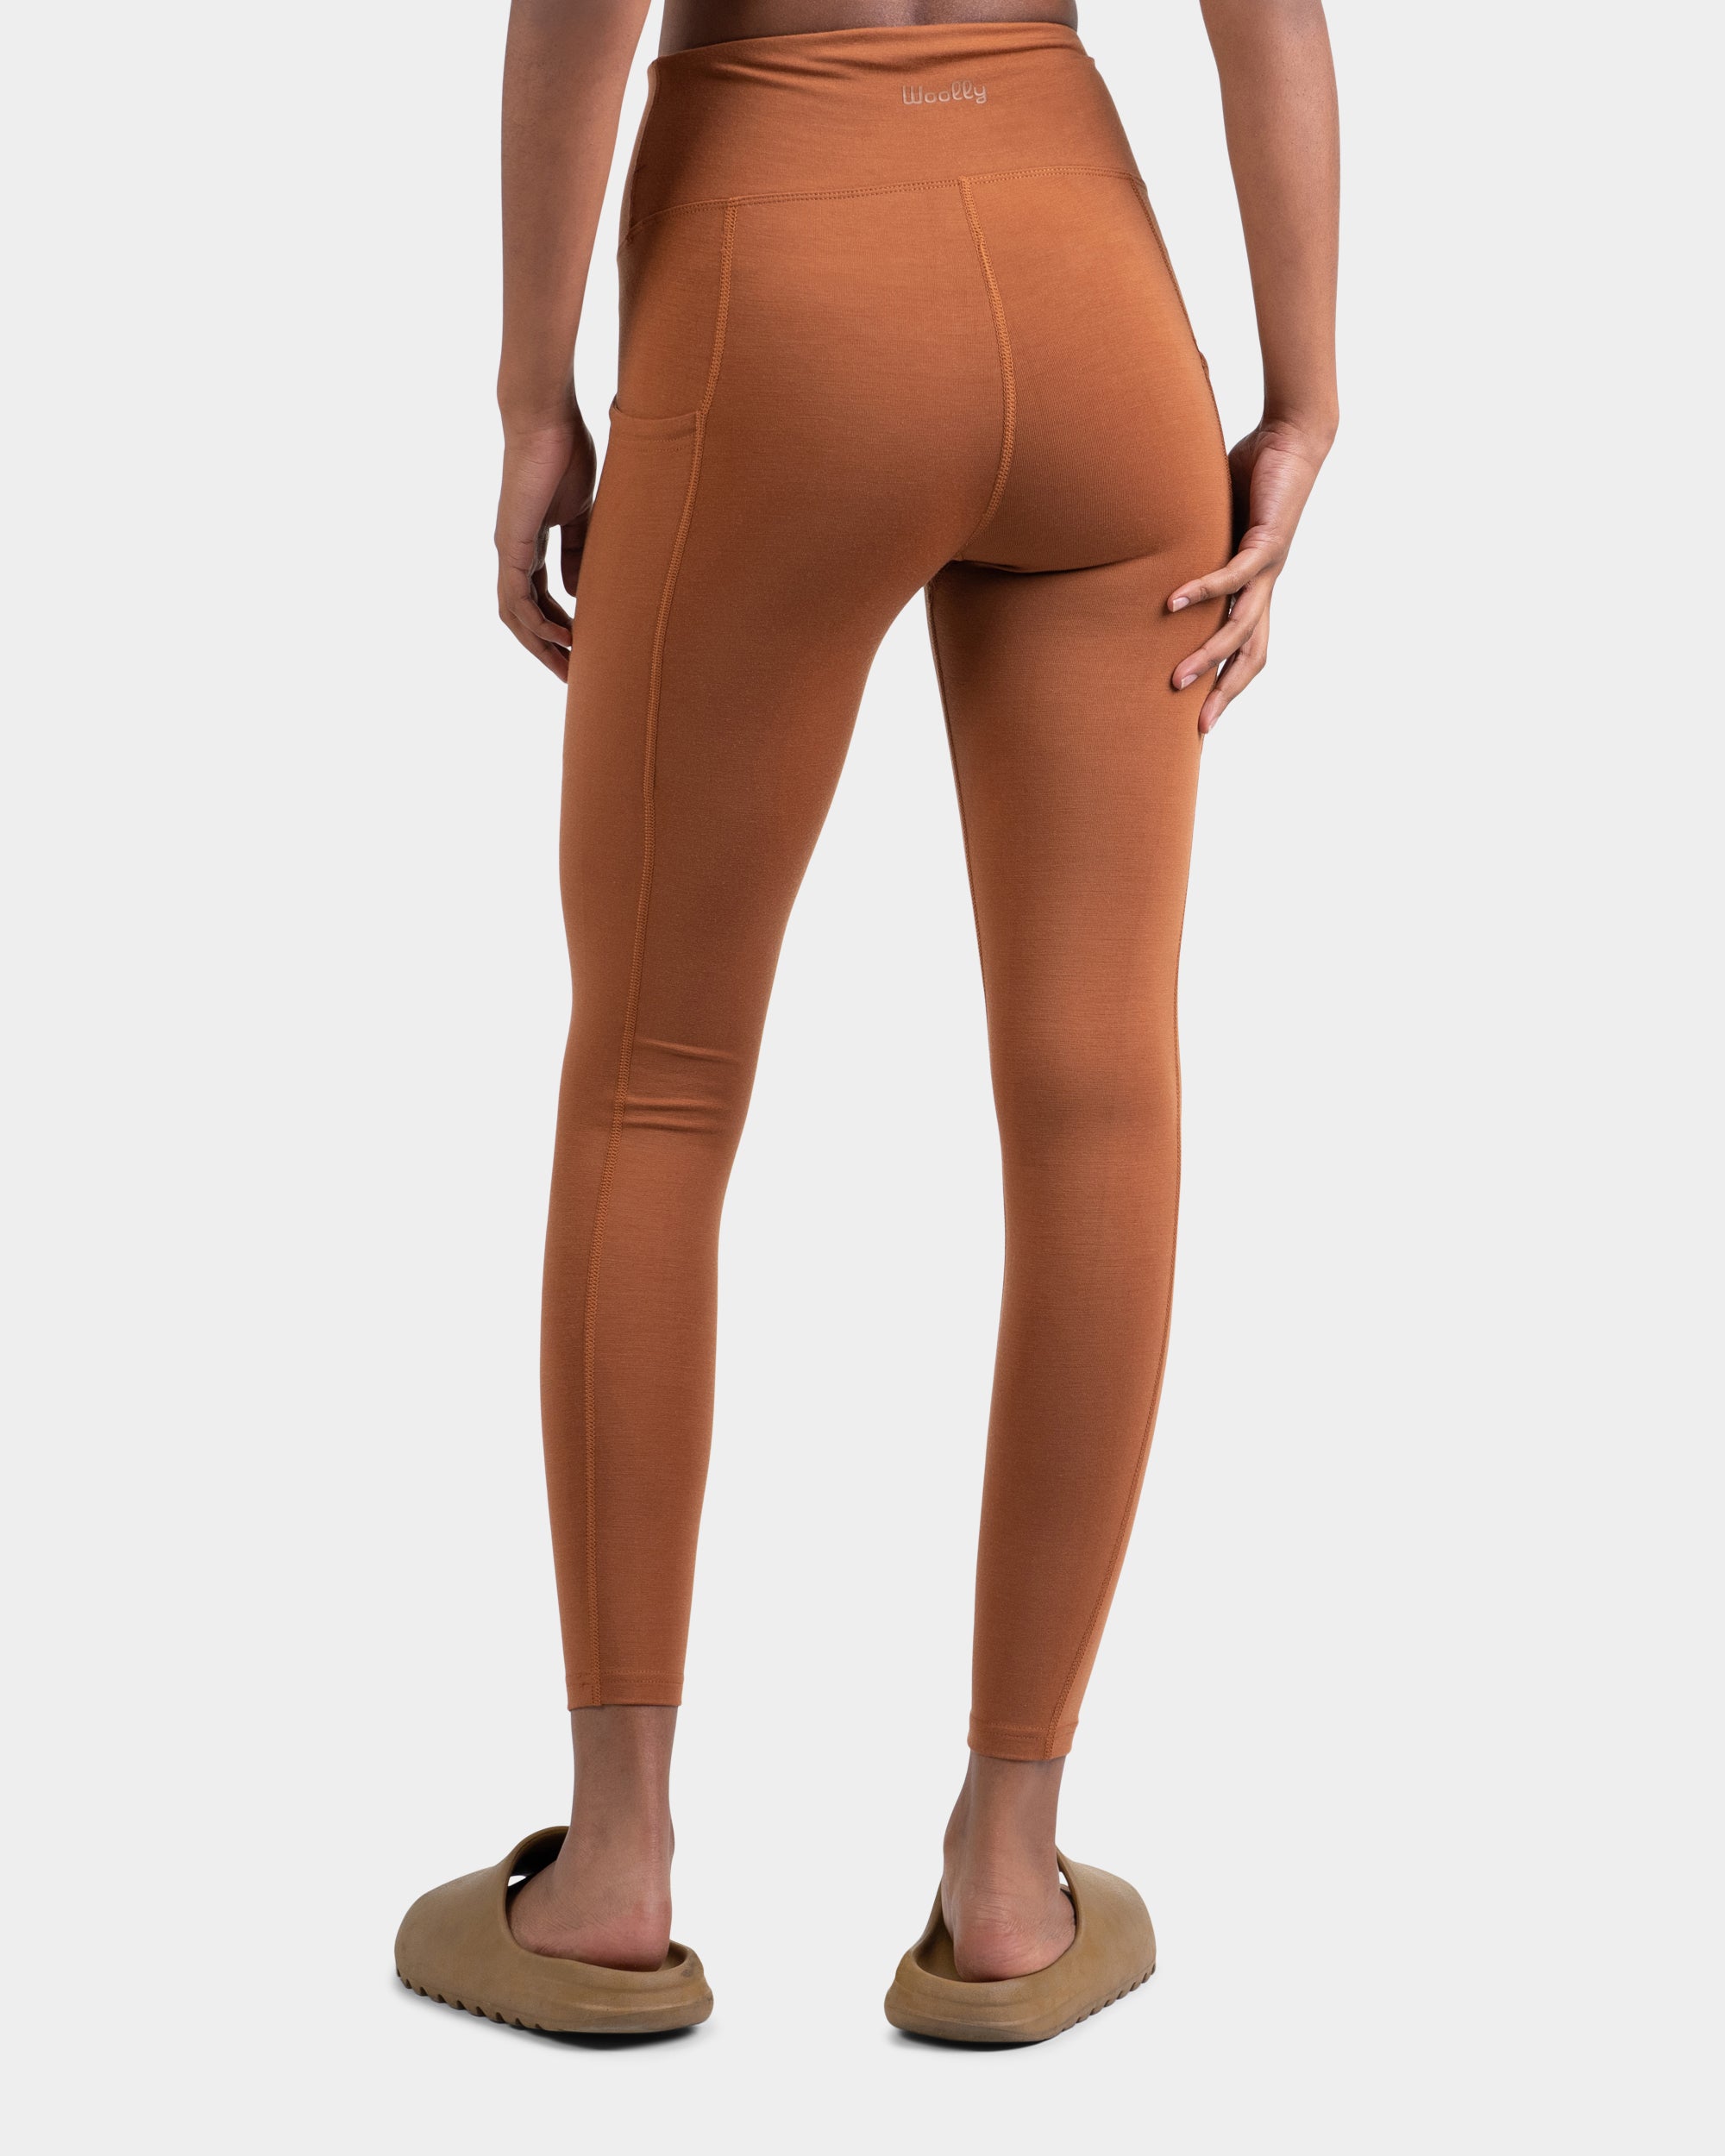 Peach Tights Lux • Tise